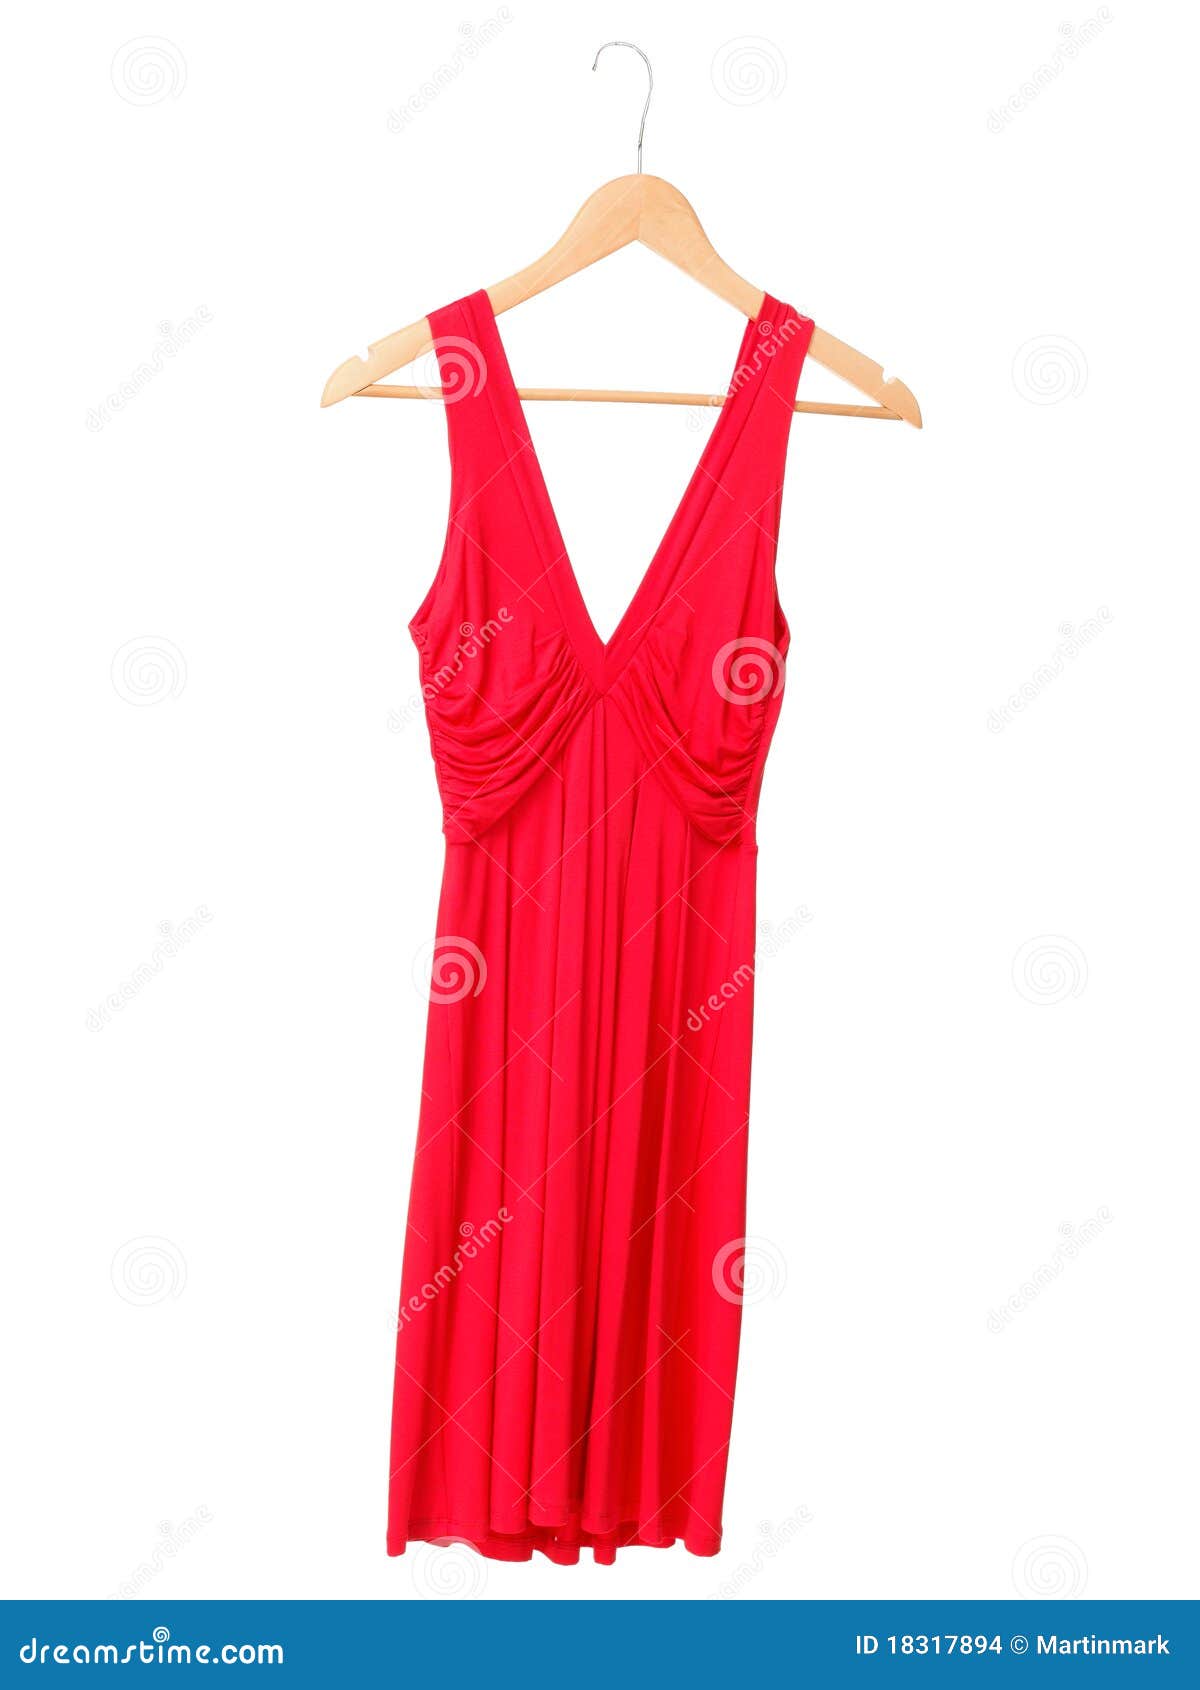 Red Dress Isolated on White Stock Photo - Image of fashionable, hanger ...